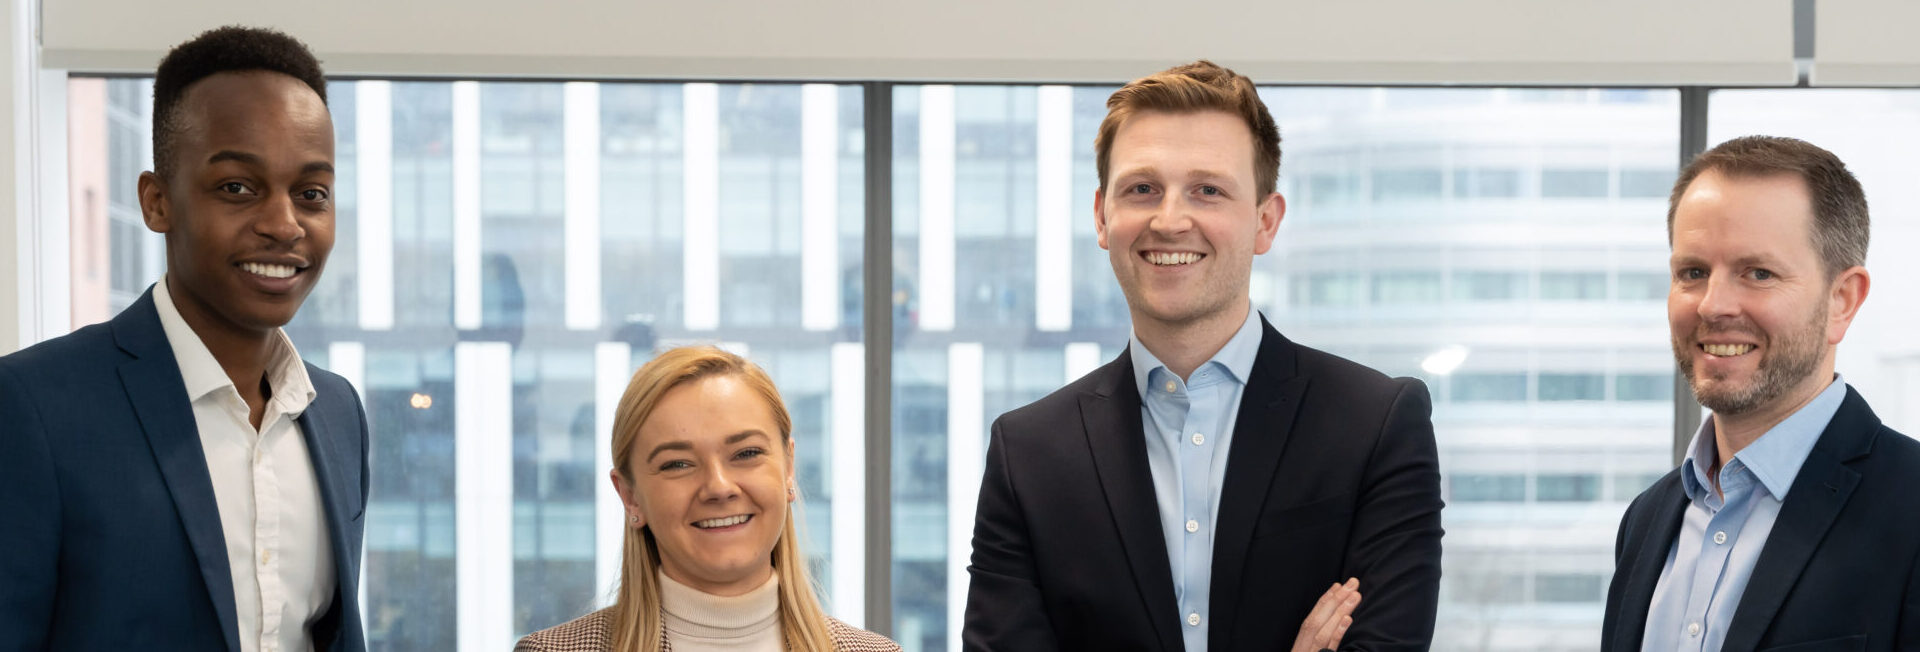 Four new advisers added to a growing team